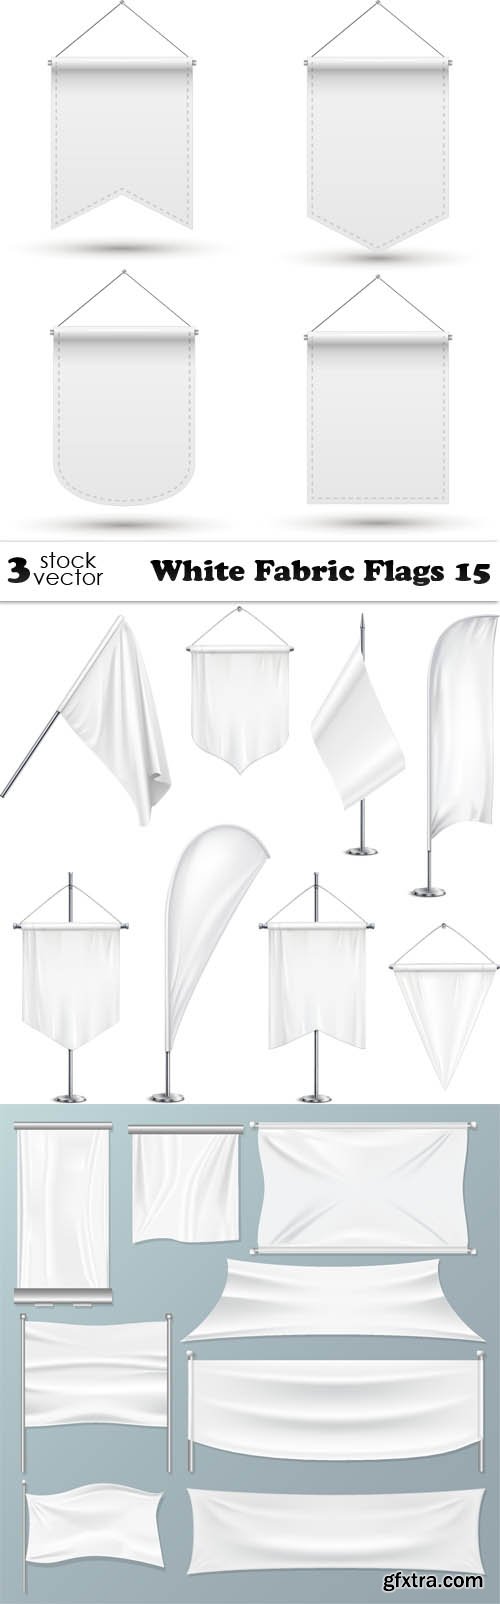 Vectors - White Fabric Flags 15